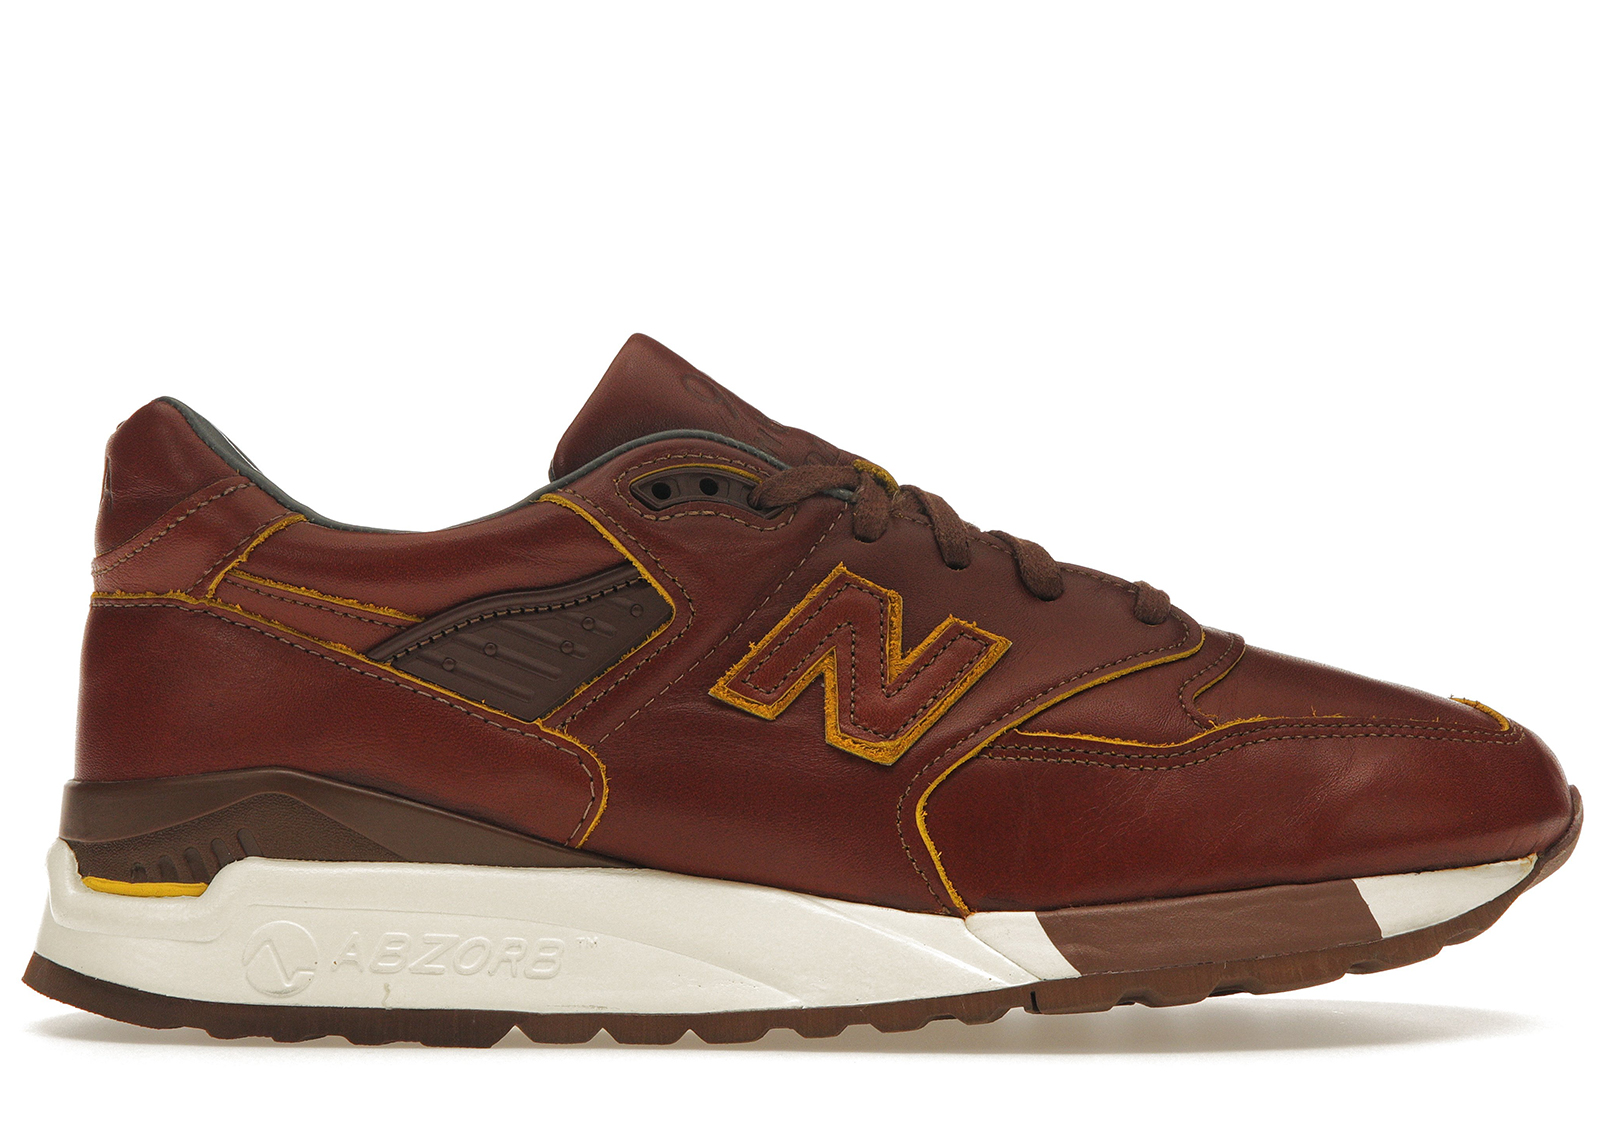 New Balance 998 Horween Leather Men's - M998DW - US